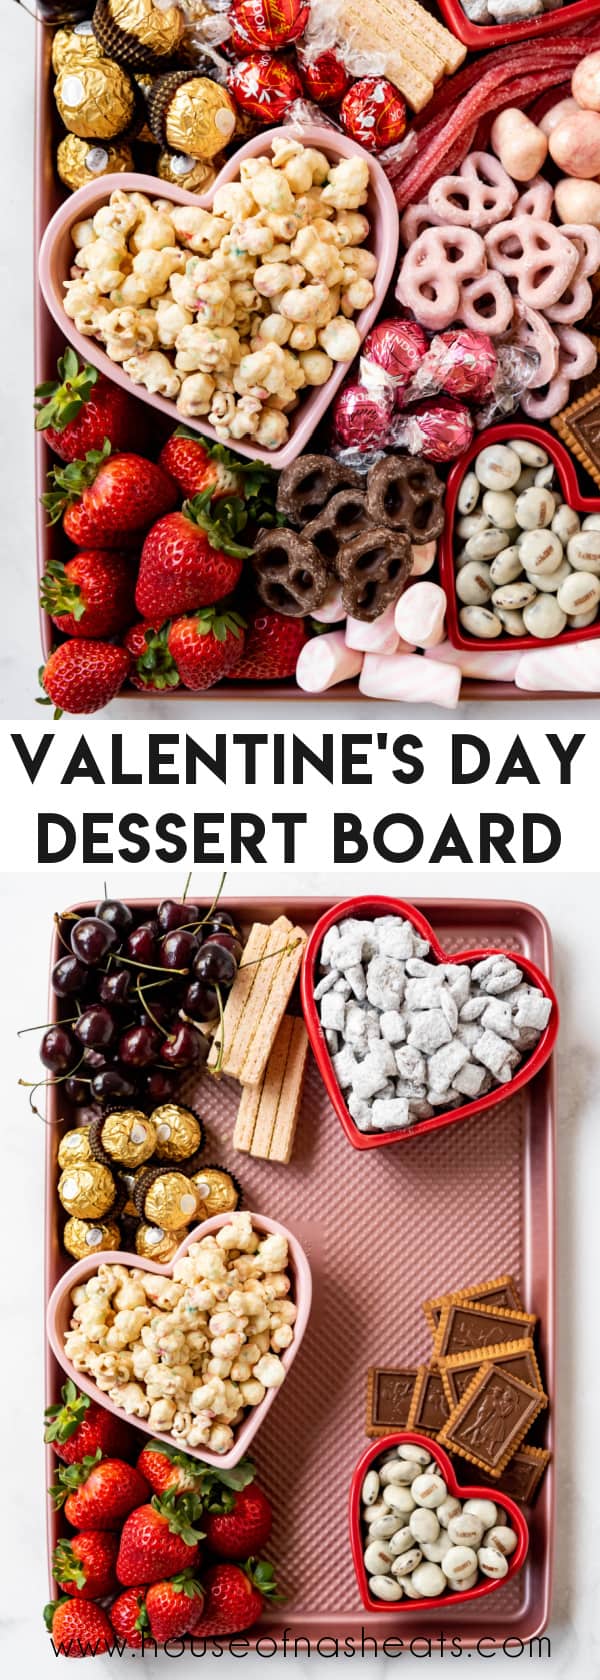 A collage of images of a Valentine's Day dessert board with text overlay.